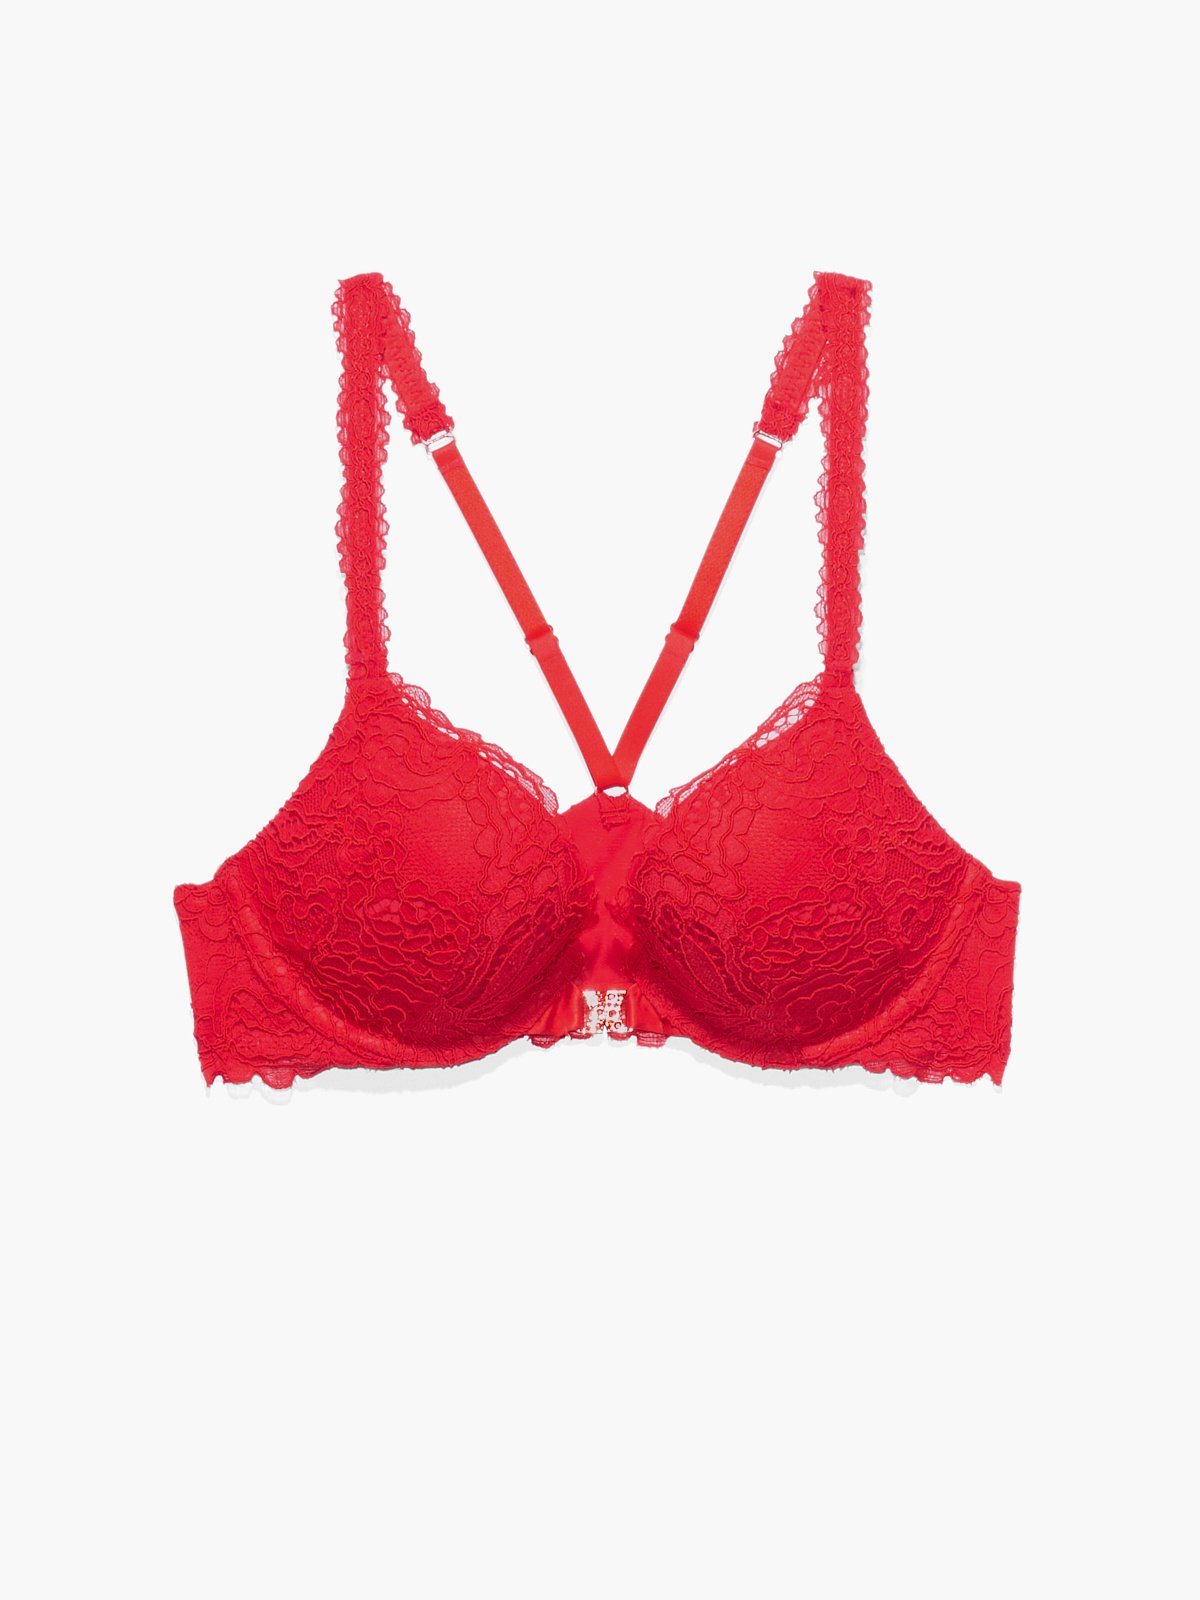 Narabar Brig Evaluering Romantic Corded Lace Push-Up Bra in Red | SAVAGE X FENTY